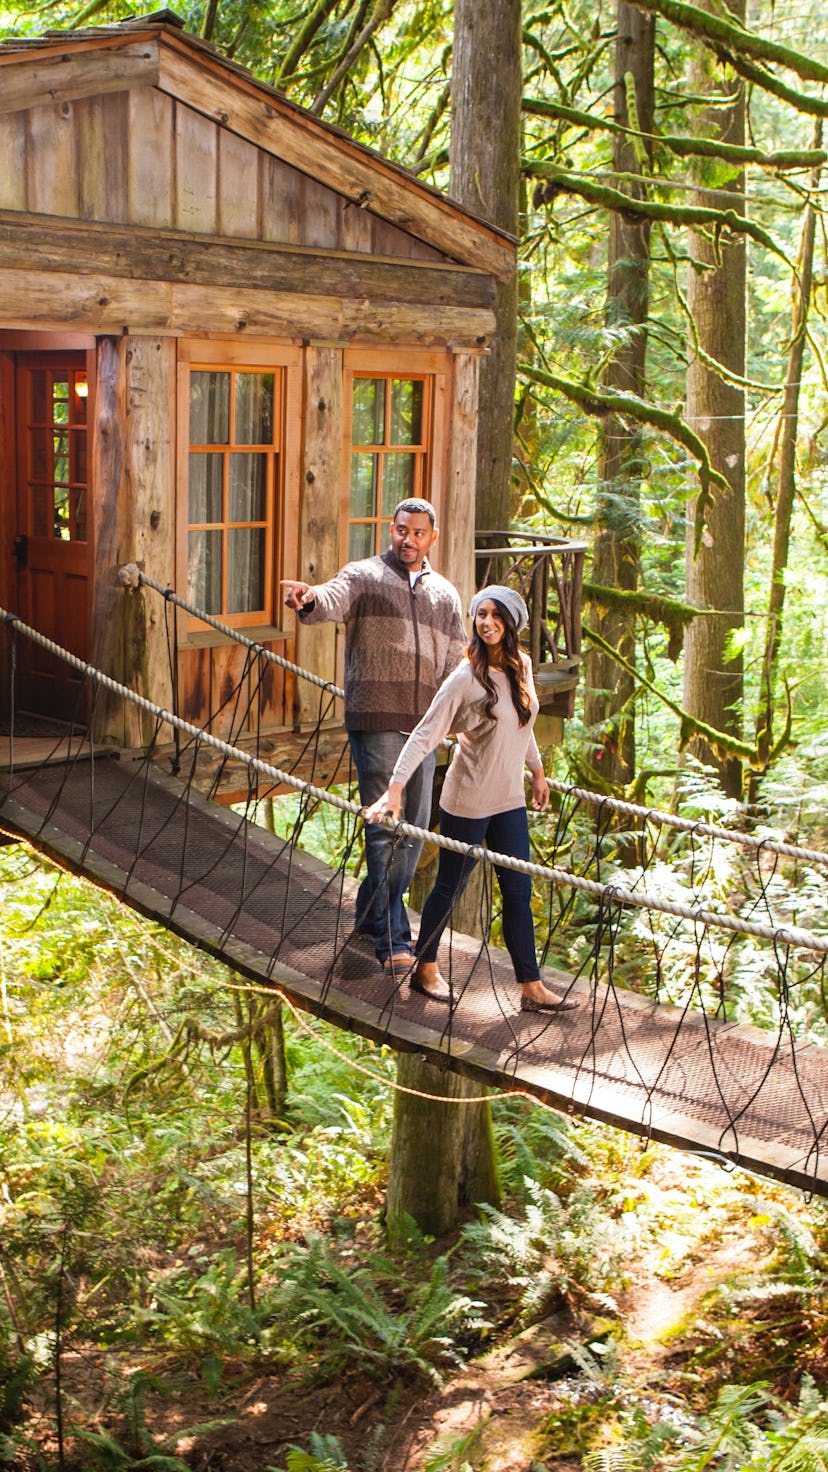 Your zodiac sign can help you determine which Airbnb you should rent, like this treehouse Airbnb.